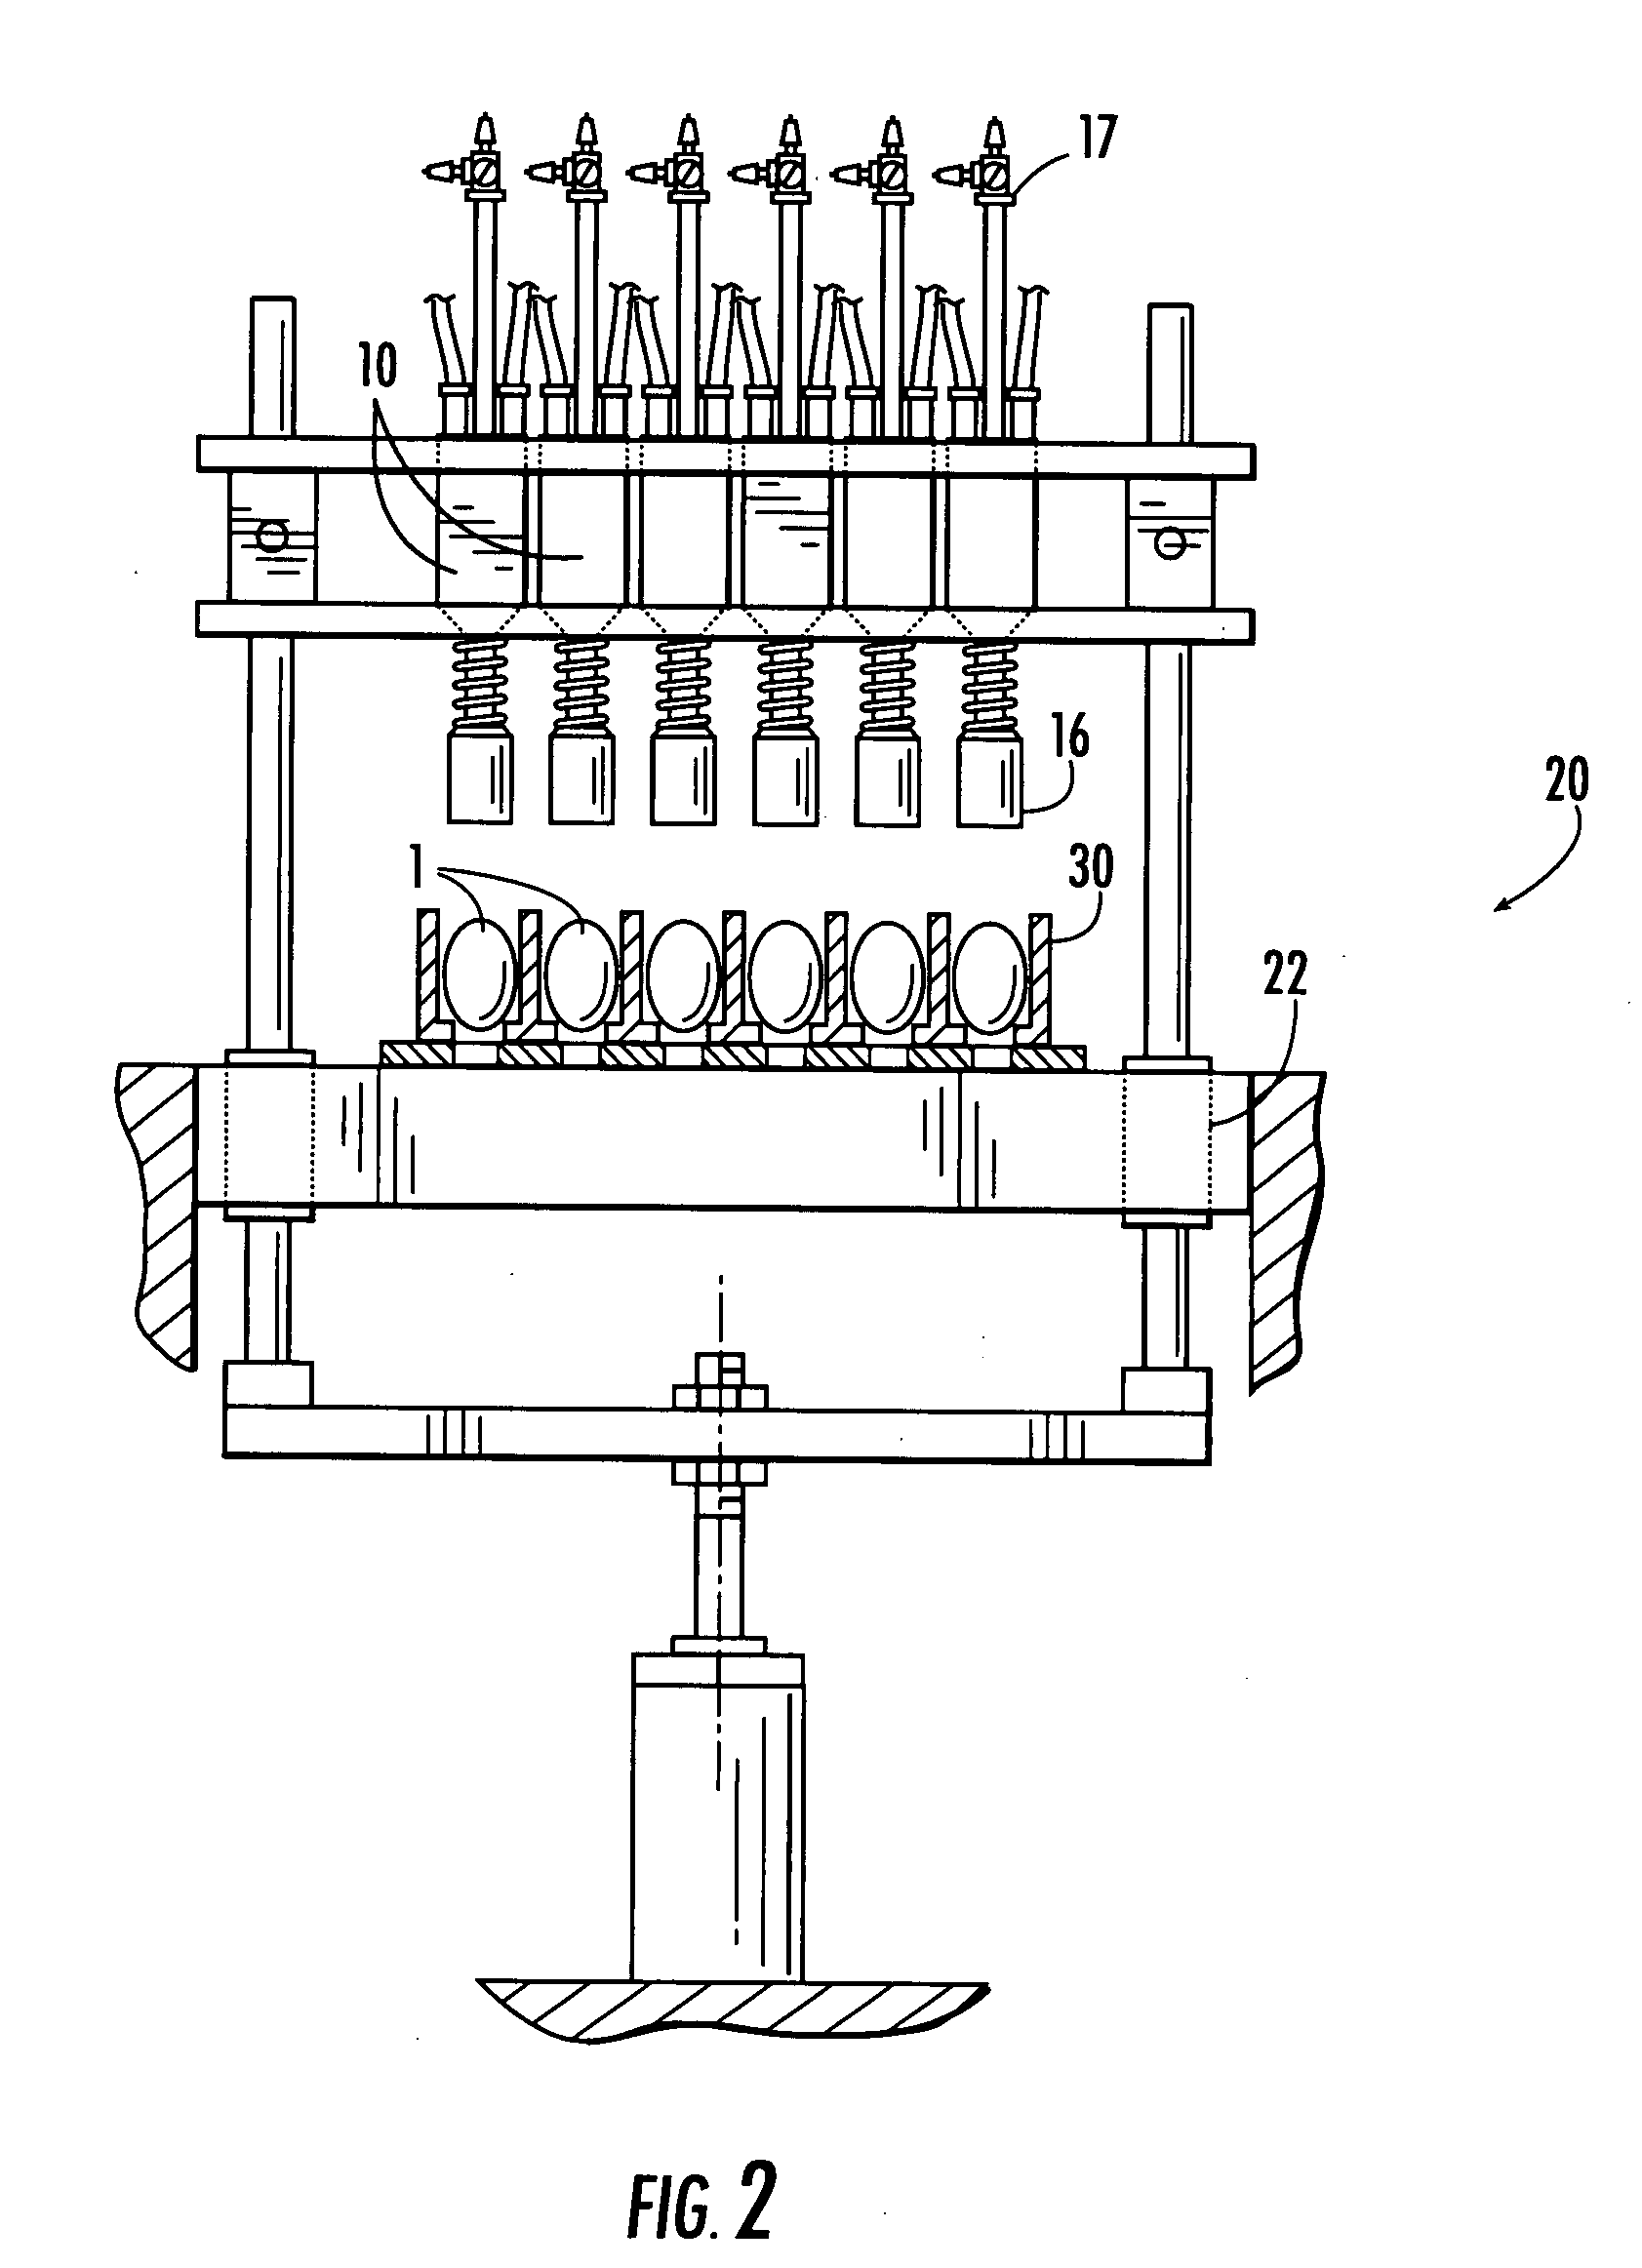 Methods and apparatus for delivering multiple substances in ovo